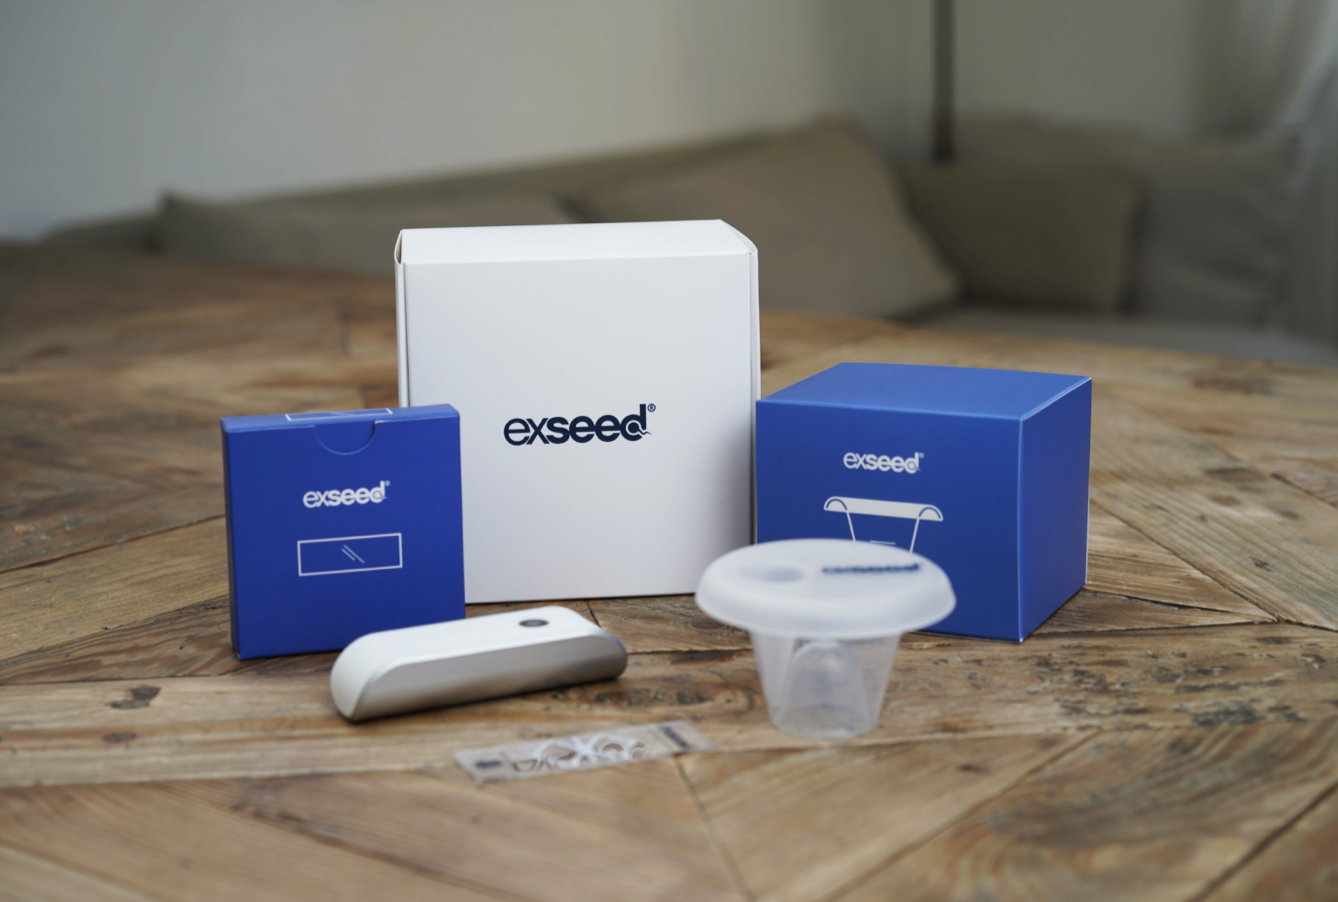 ExSeed puts men's fertility at the forefront with their at-home sperm tests.